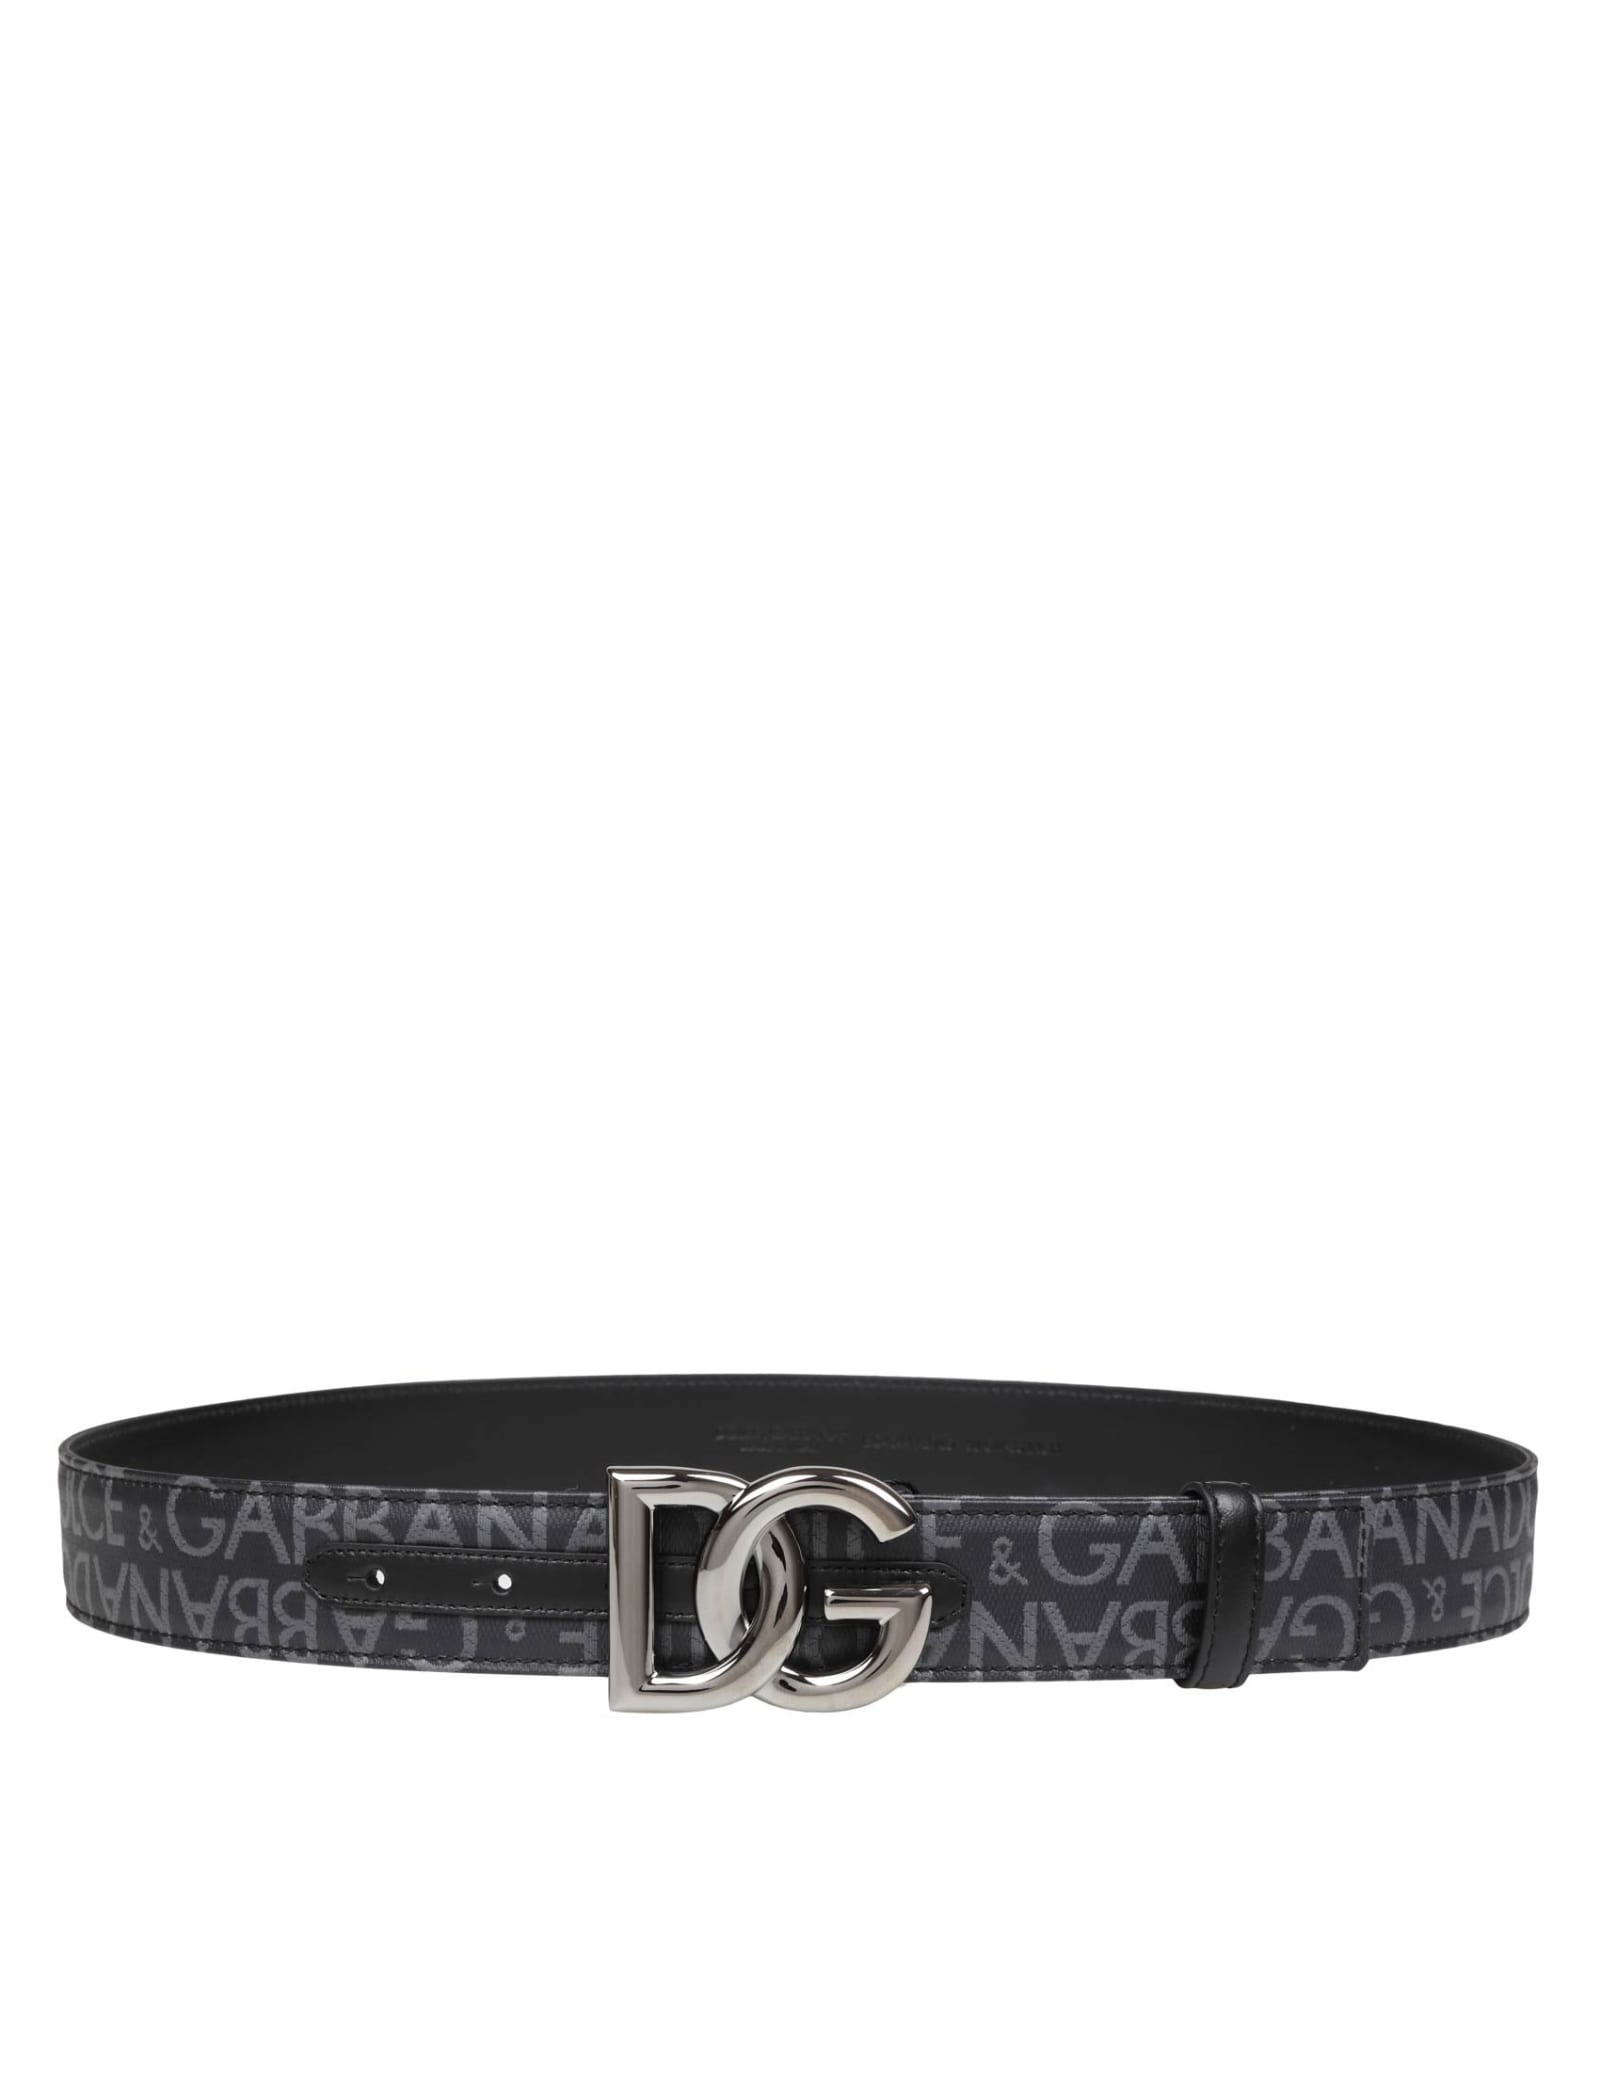 DOLCE & GABBANA BELT IN JACQUARD FABRIC WITH METAL DG BUCKLE